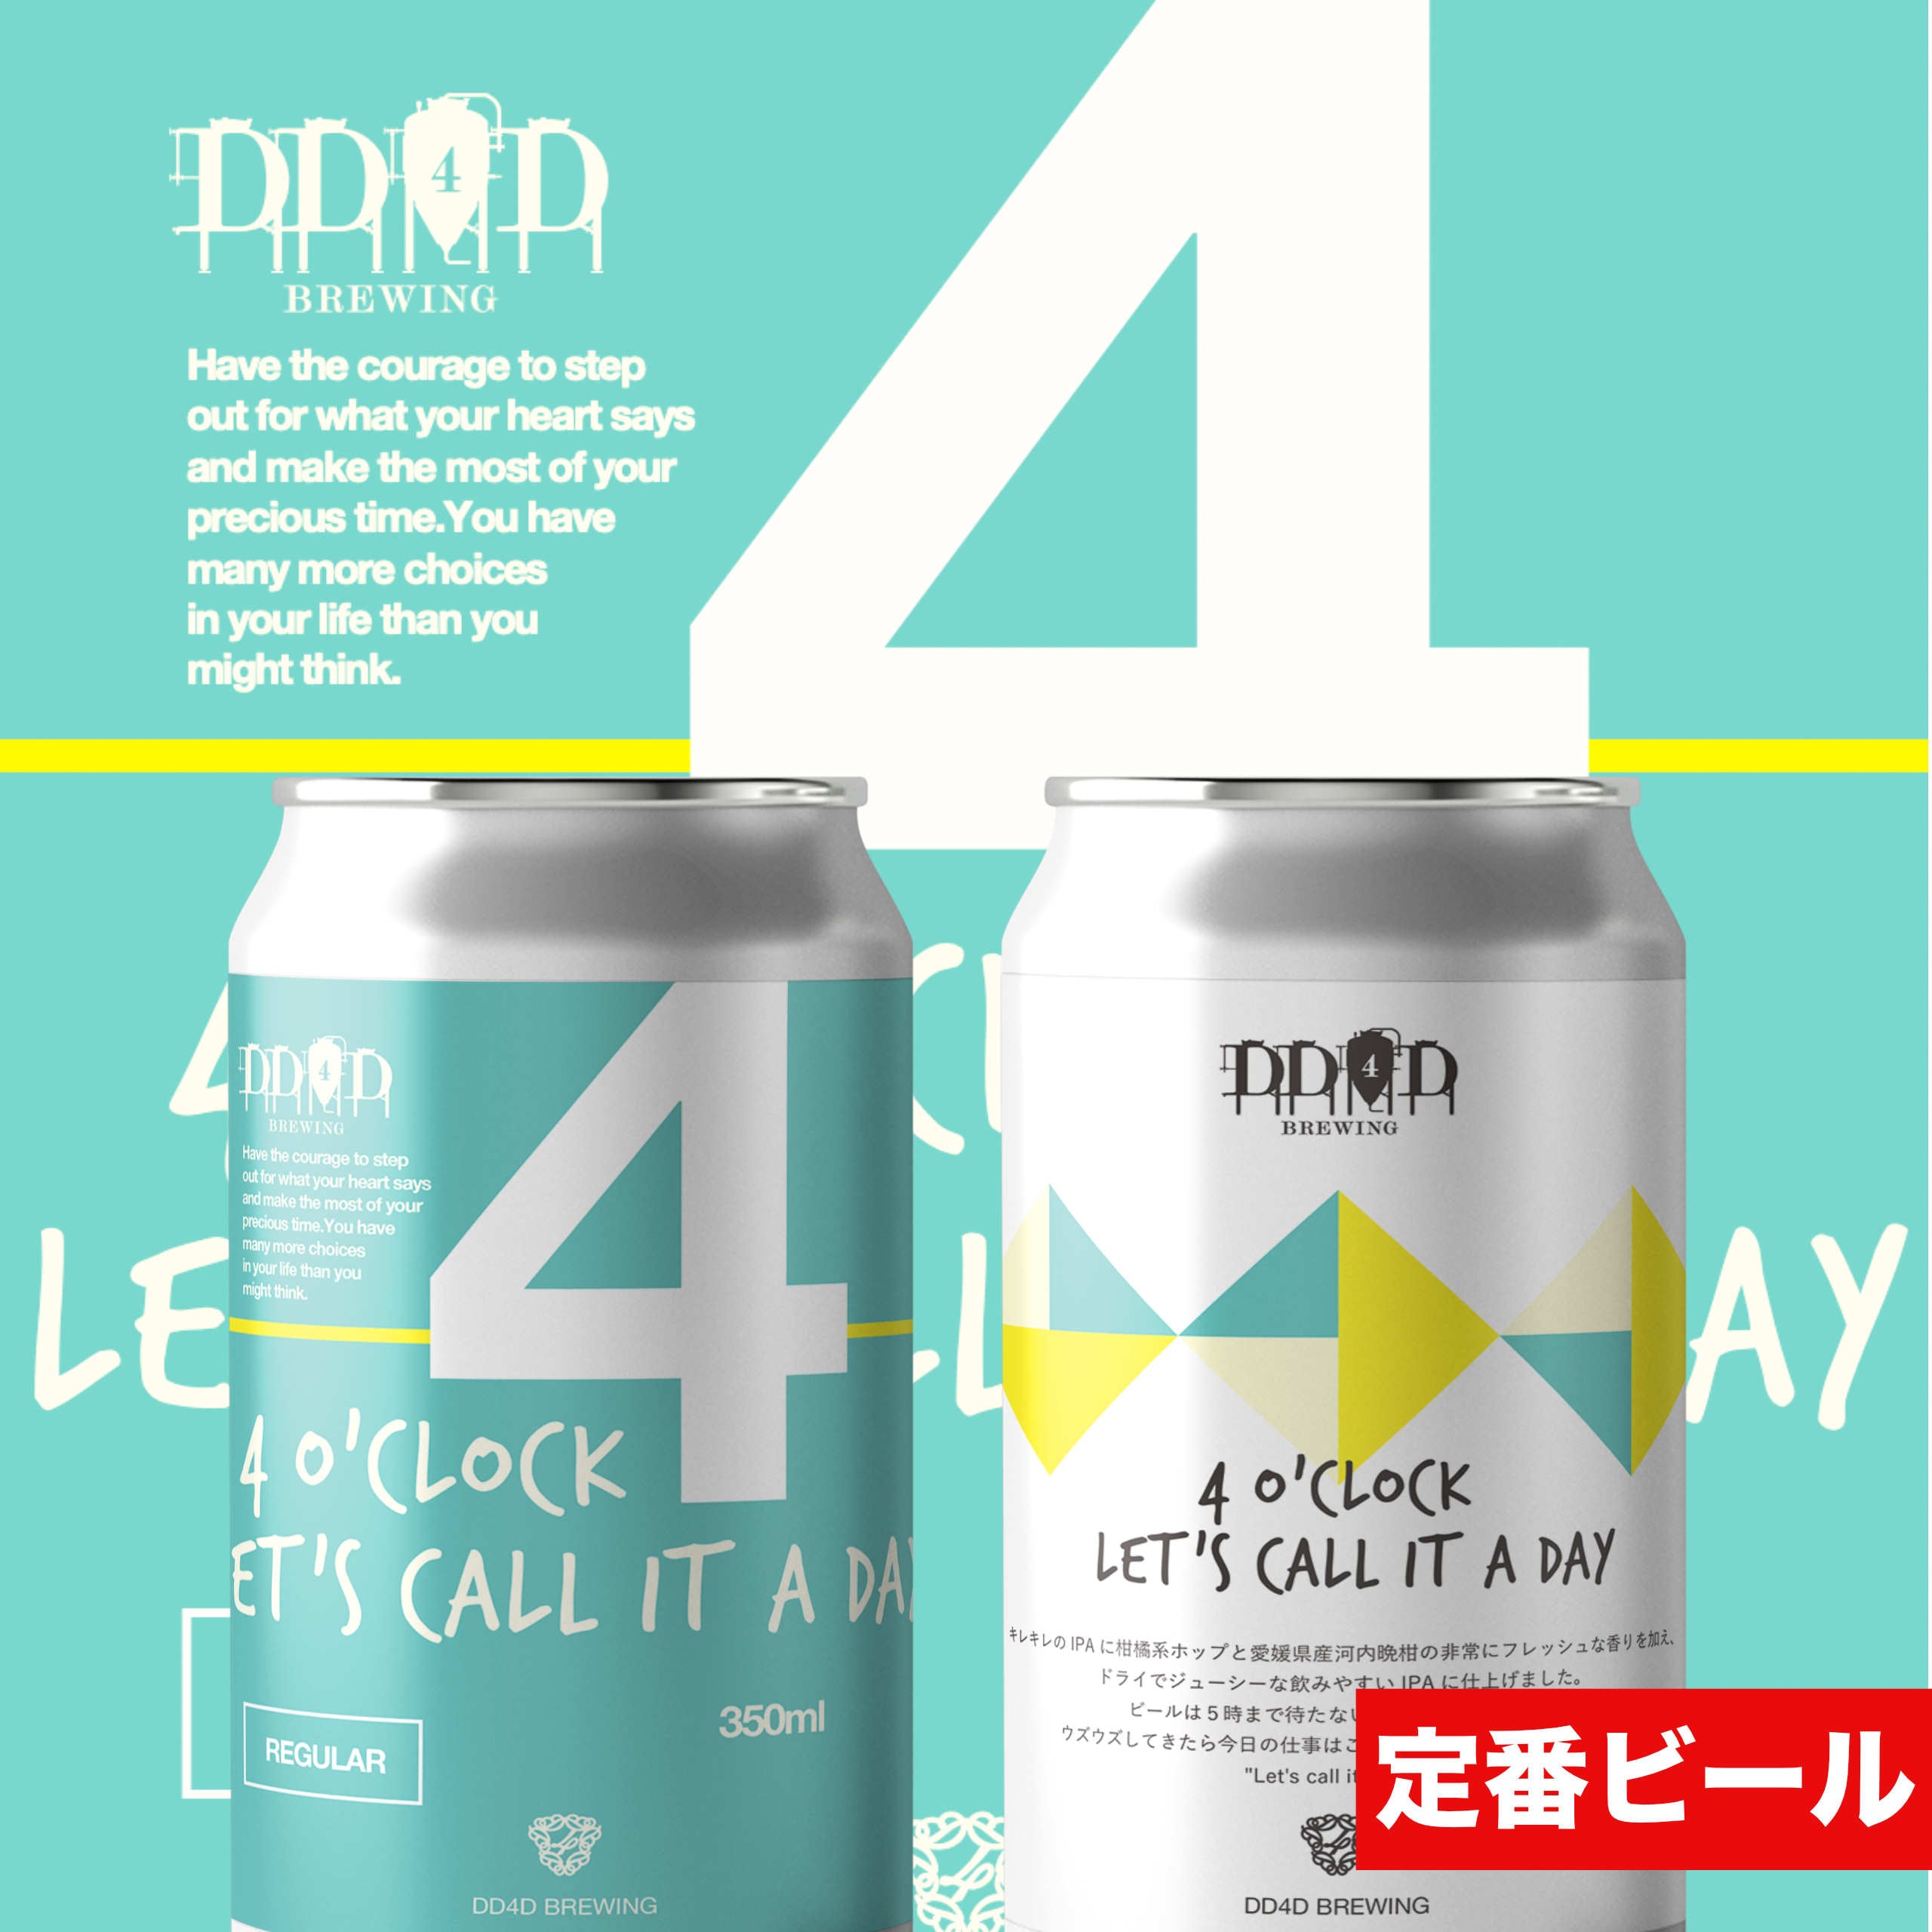 4 O'CLOCK LET'S CALL IT A DAY (Brut IPA)｜DD4D BREWING 公式オンラインストア – DD4D  BREWING u0026 CLOTHING STORE